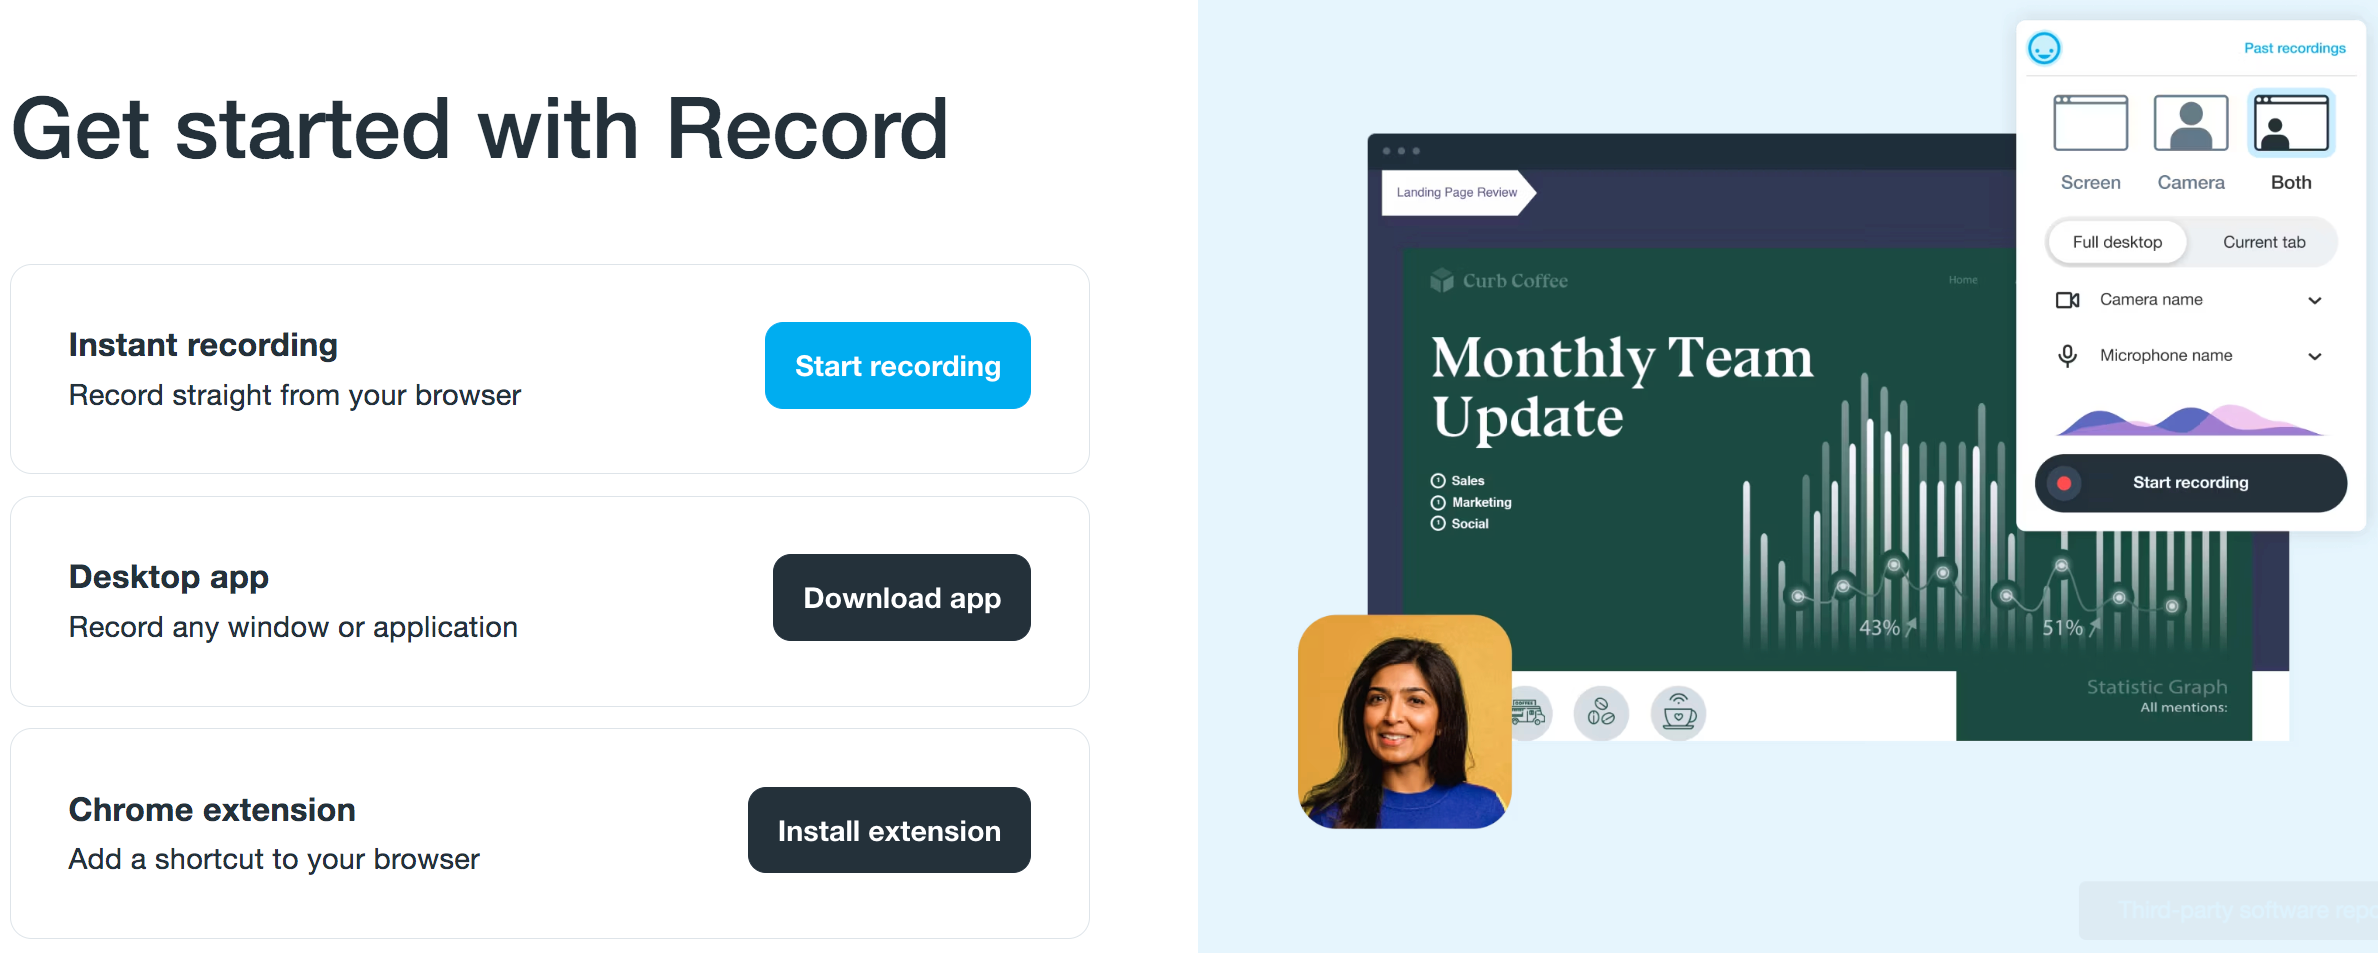 Screenshot of Vimeo's Get started with Record page